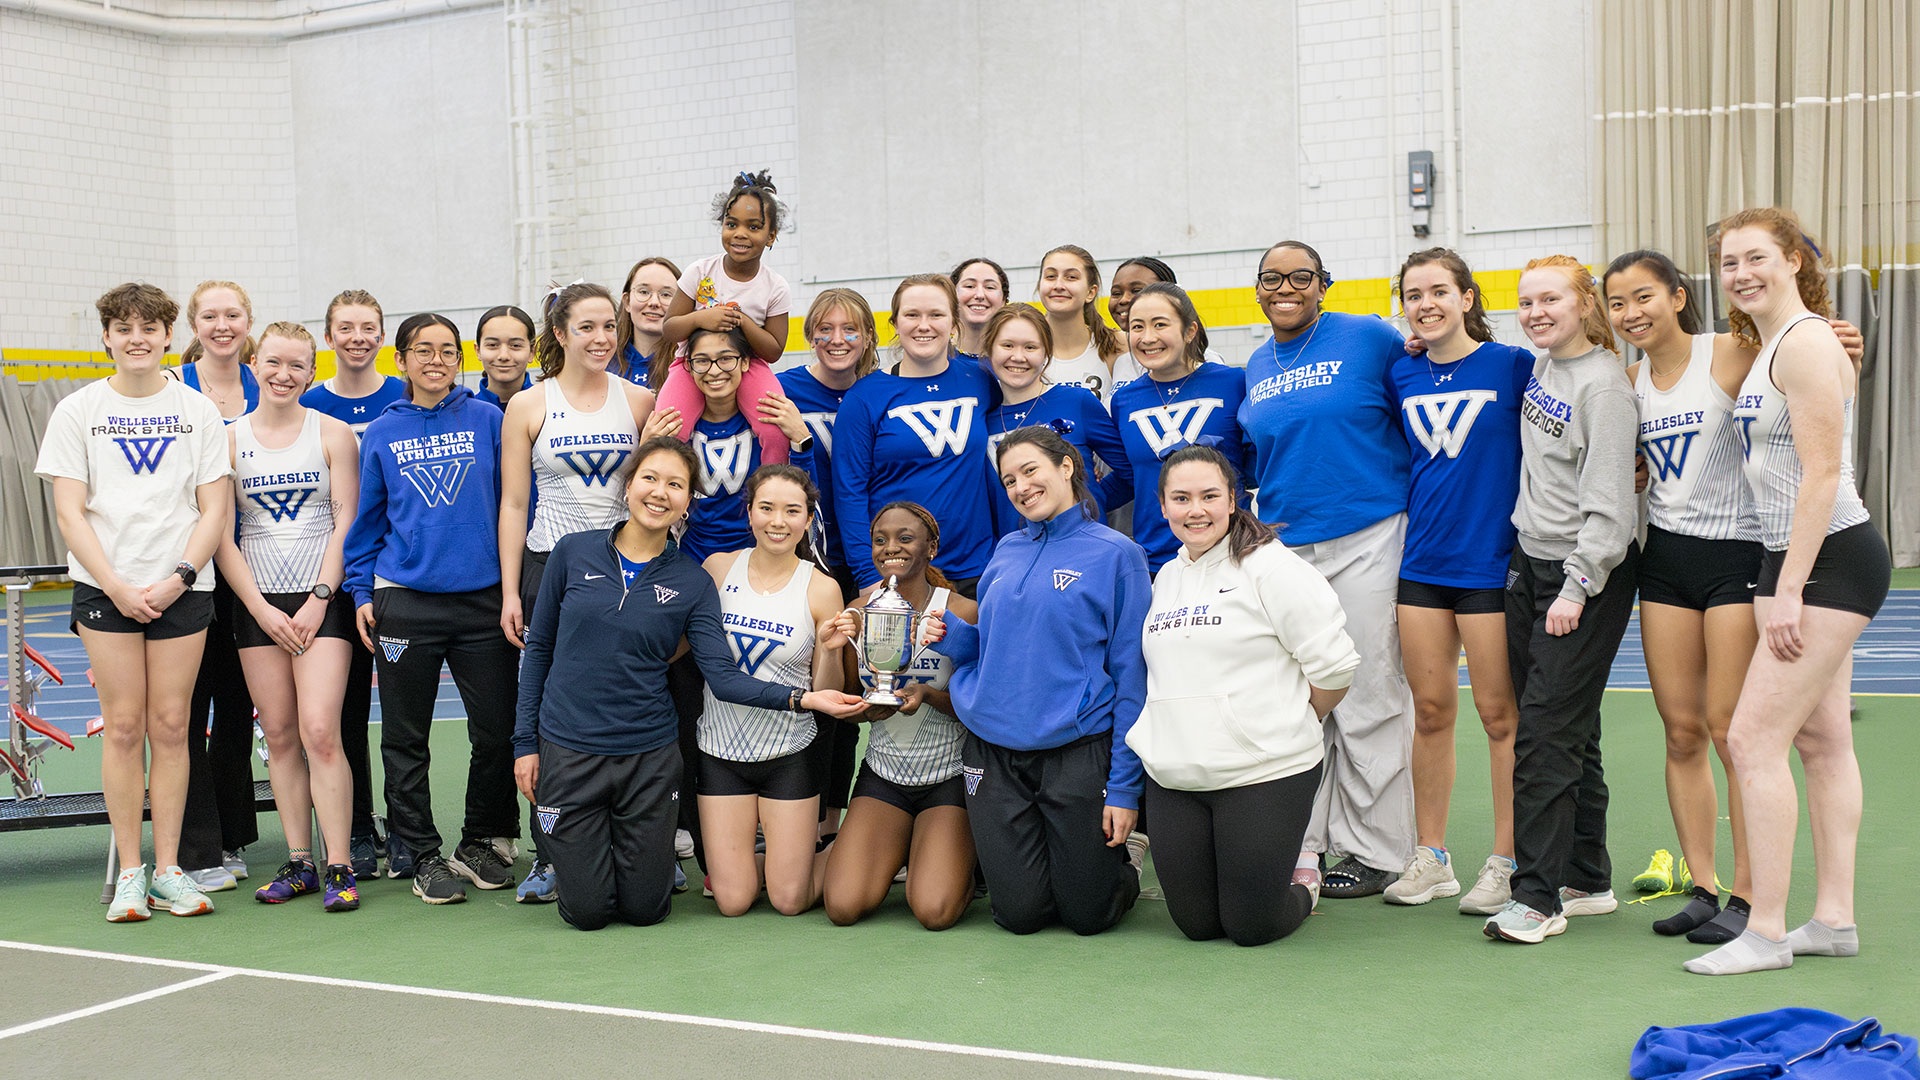 Wellesley College track &amp; field won the Peter de Villiers Cup at Smith College on Saturday (Frank Poulin)